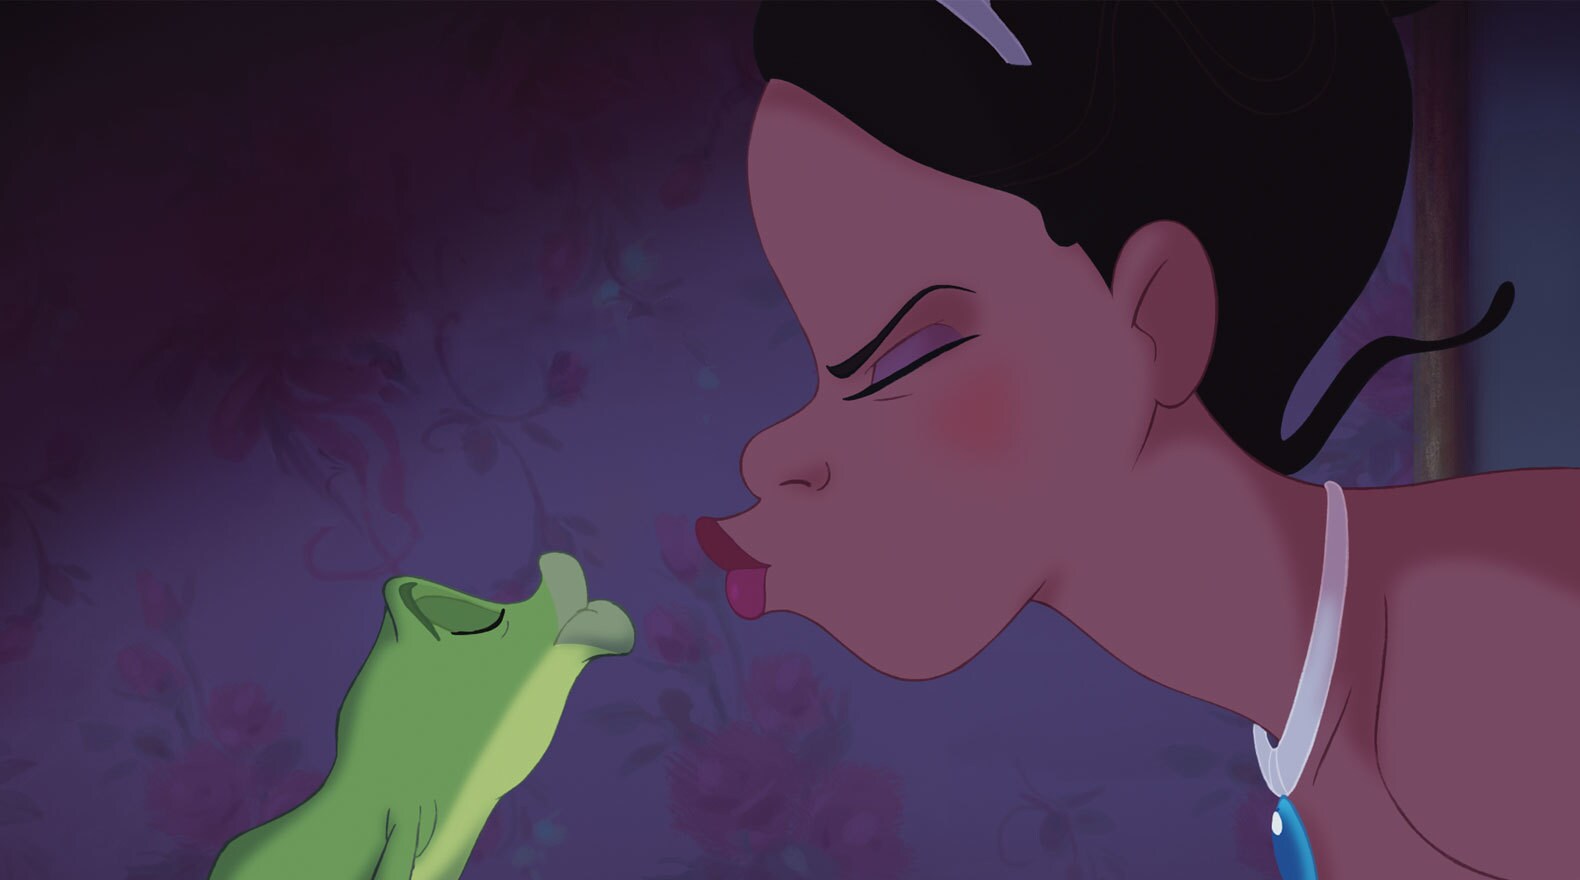 Tiana kisses Naveen as a frog in The Princess and the Frog